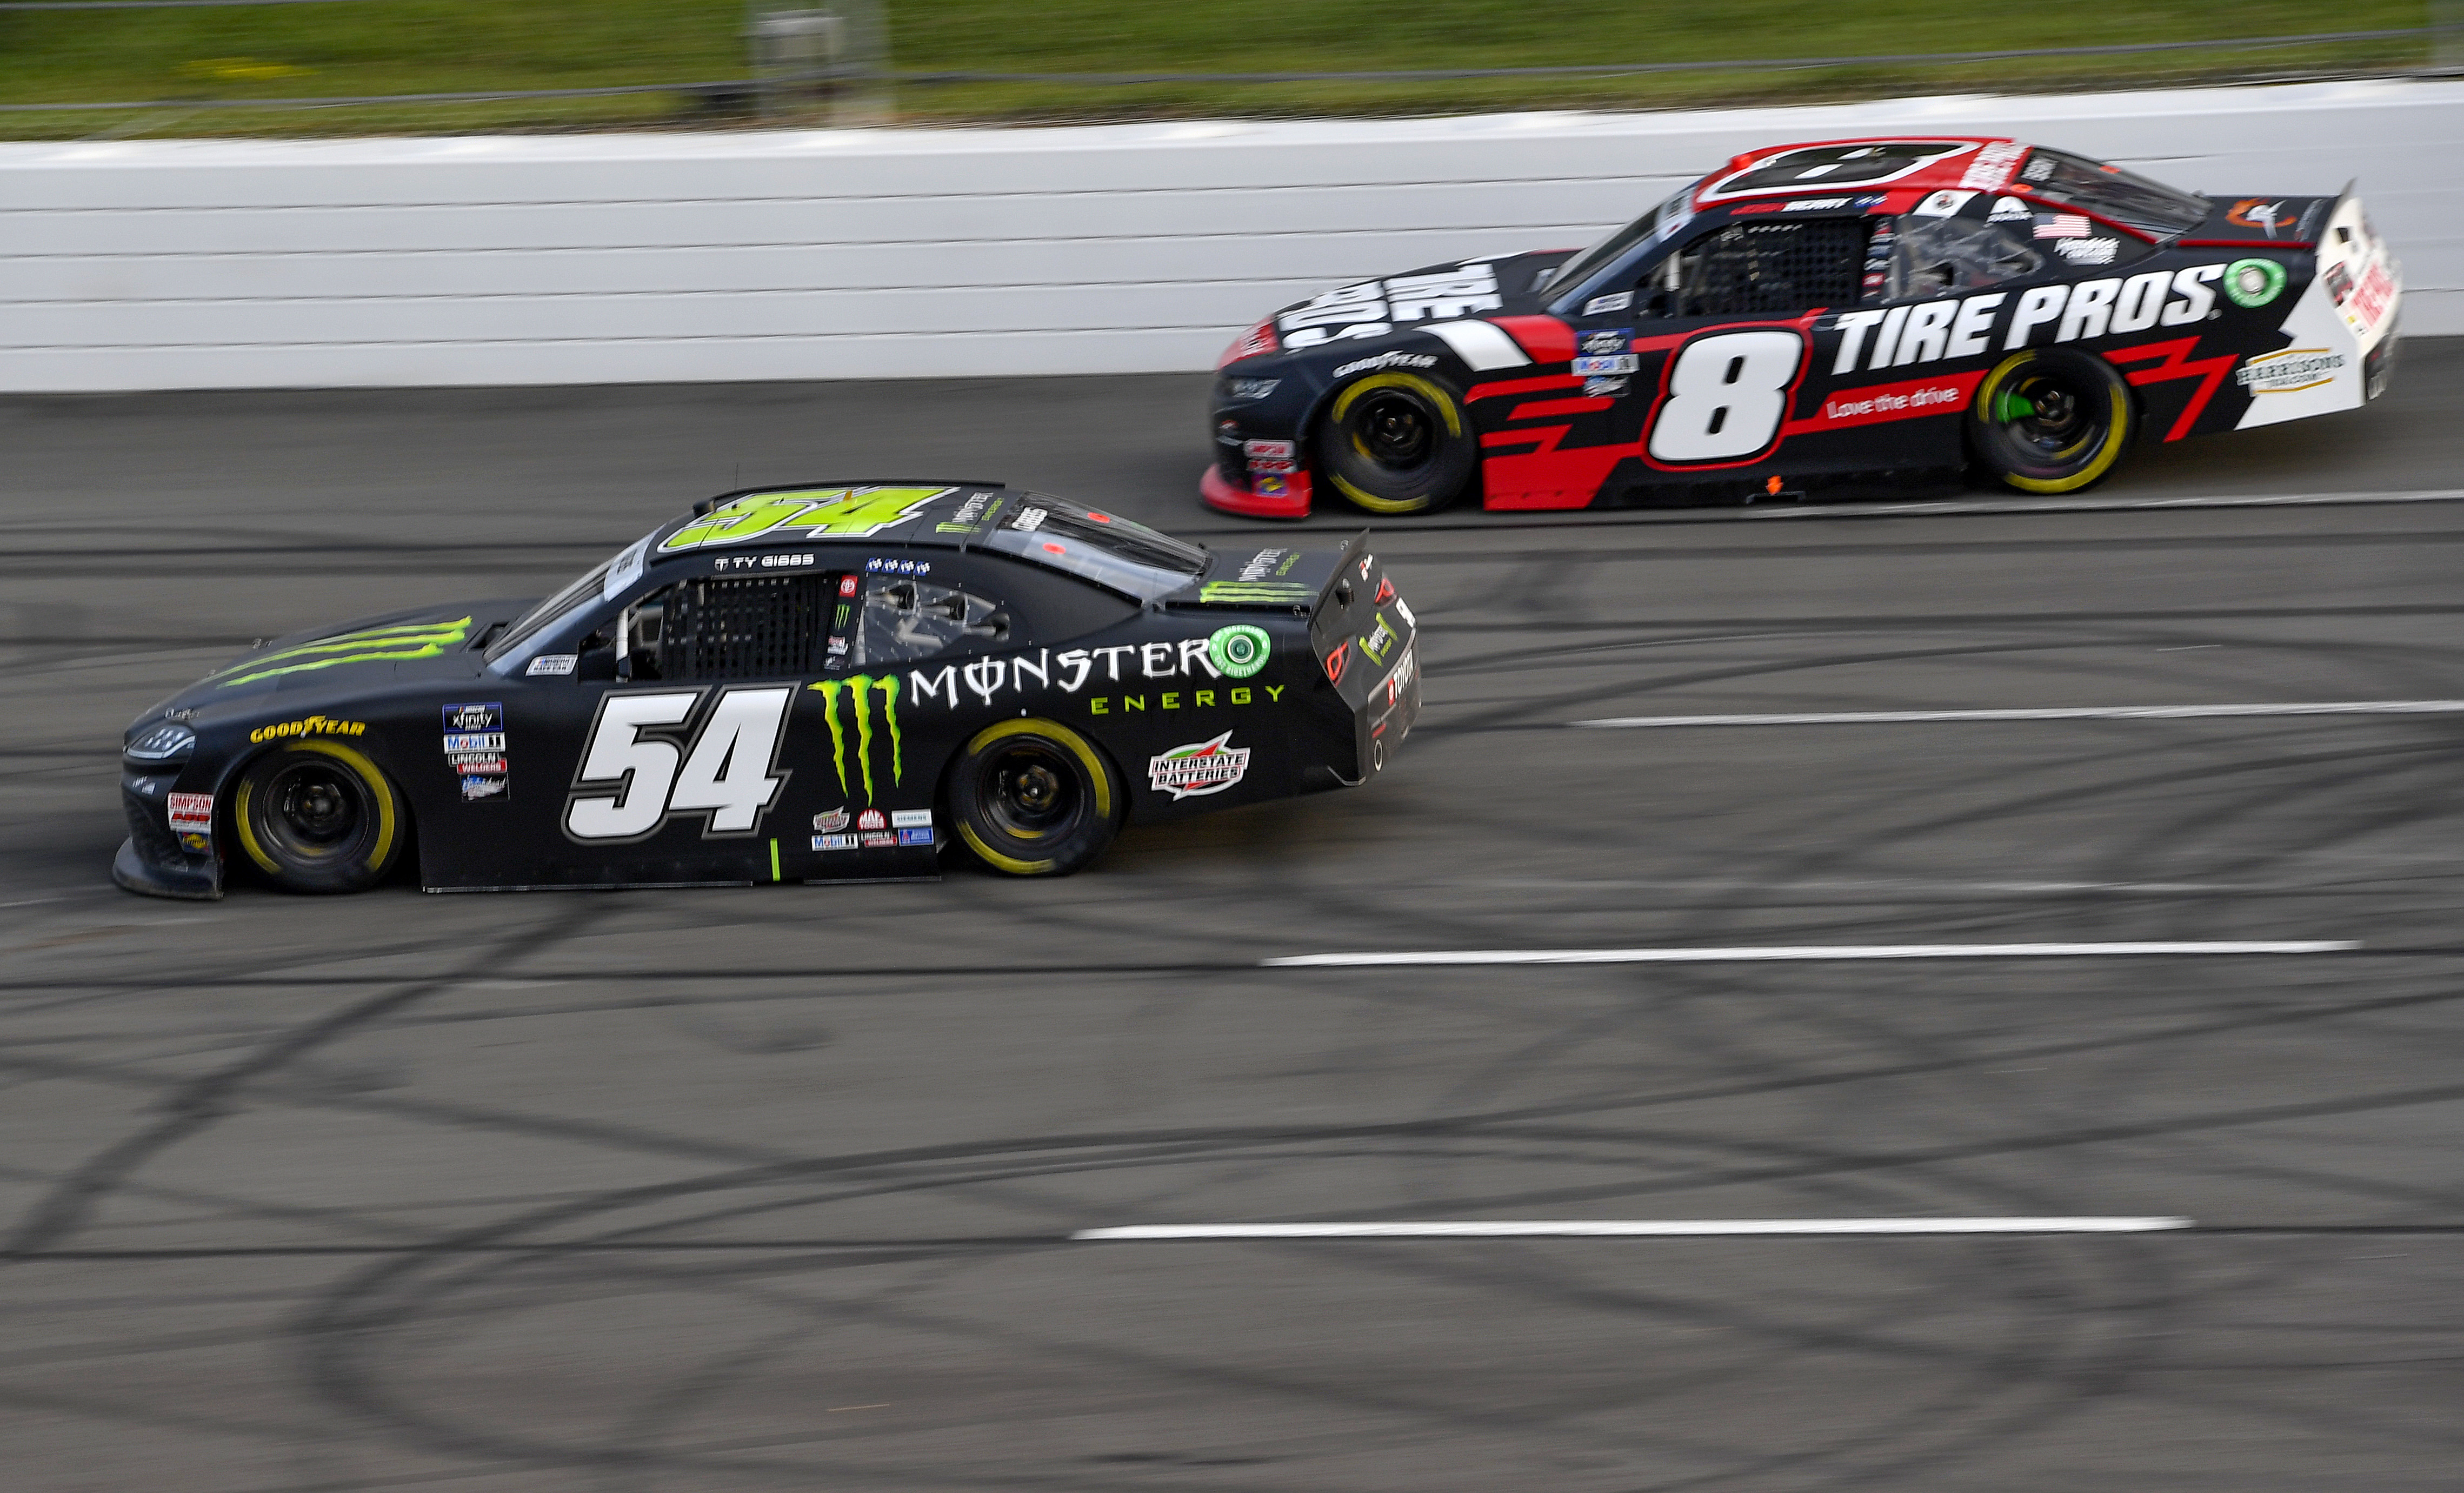 Ty Gibbs, driver of the #54 Monster Energy Toyota, and Josh Berry, driver of the #8 Tire Pros Chevrolet, race during the NASCAR Xfinity Series Explore the Pocono Mountains 225 at Pocono Raceway on July 23, 2022 in Long Pond, Pennsylvania.